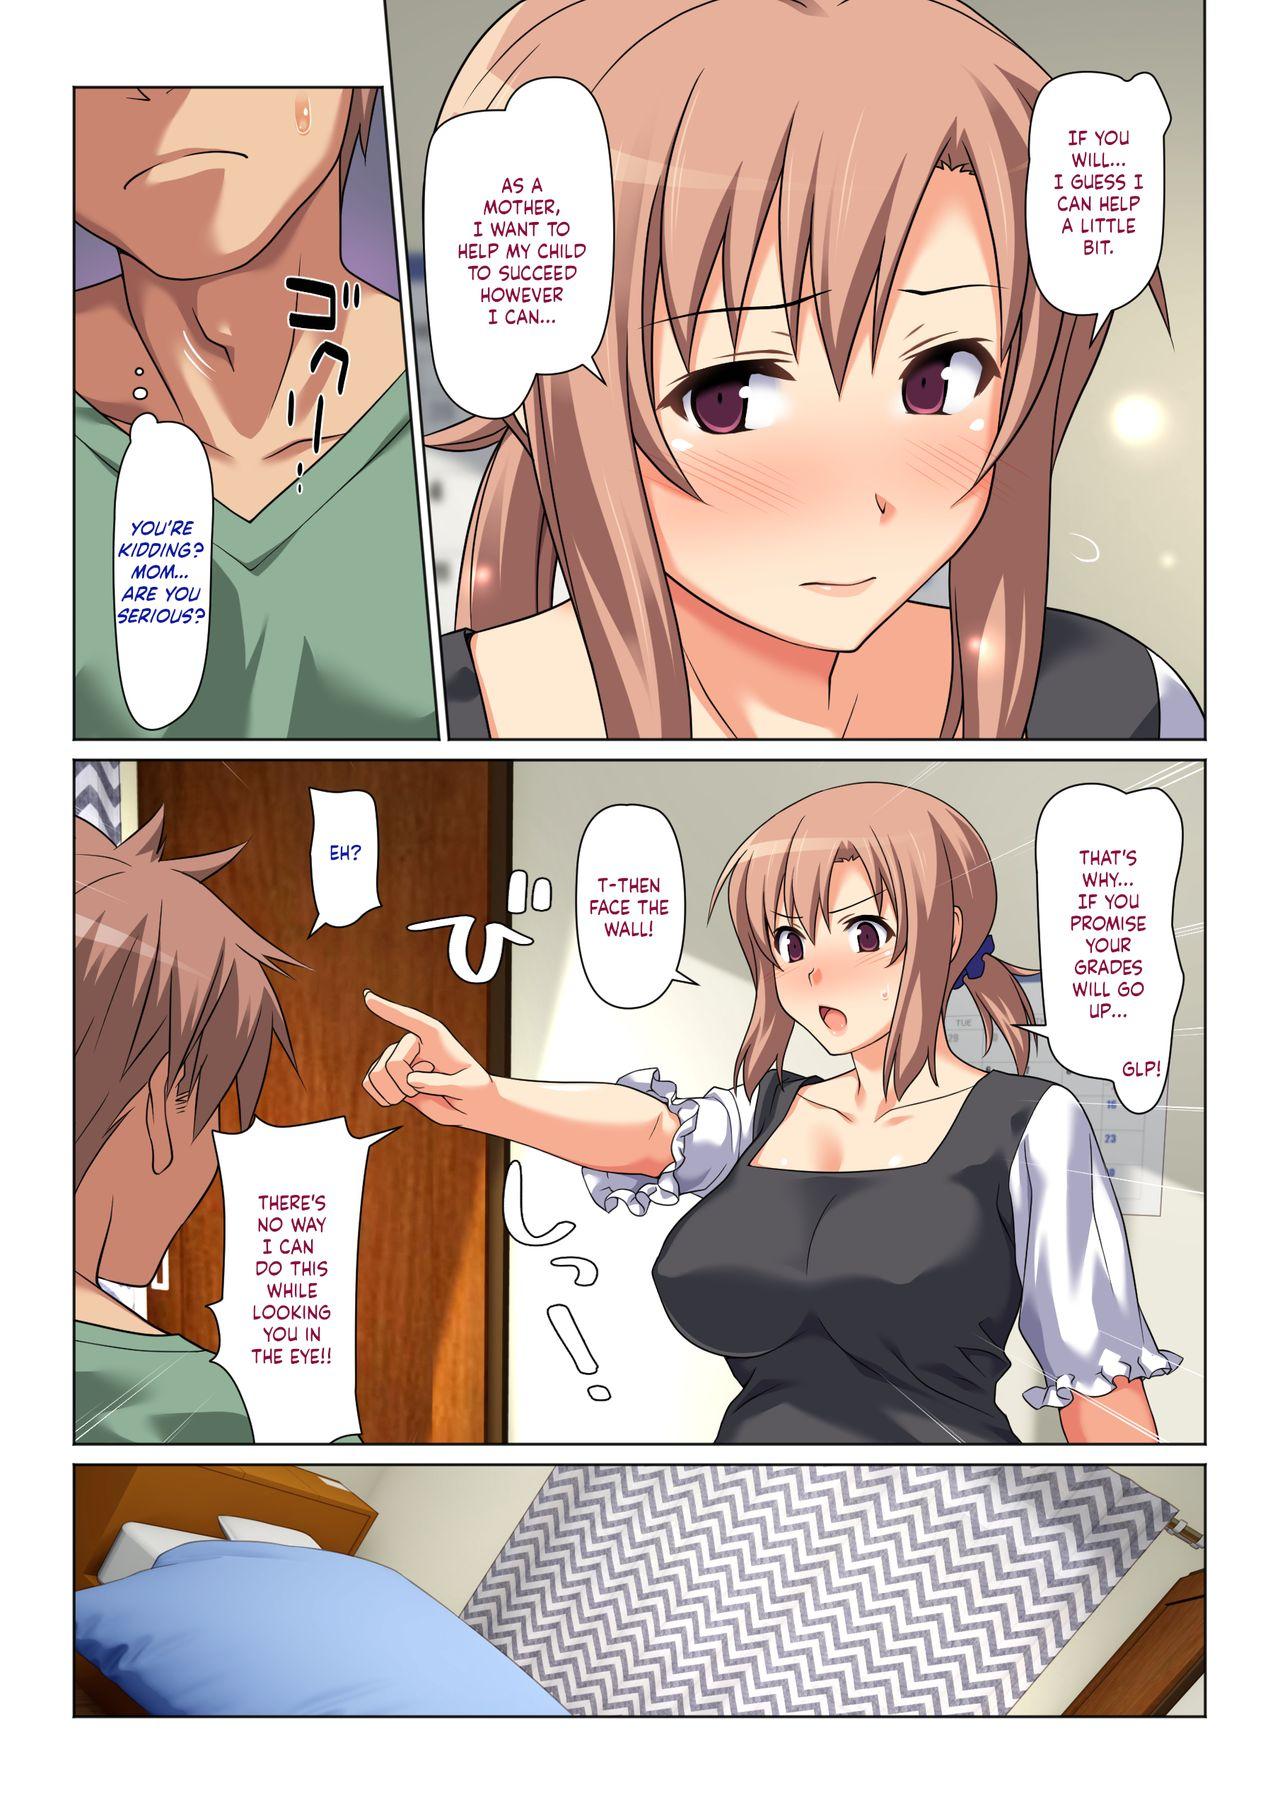 Hot Blow Jobs Seiseki UP o Jouken ni Mainichi Nuite kureru Okaa-san | Mom Will Put Out Everyday On The Condition That His Grades Improve - Original Free Amateur Porn - Page 7